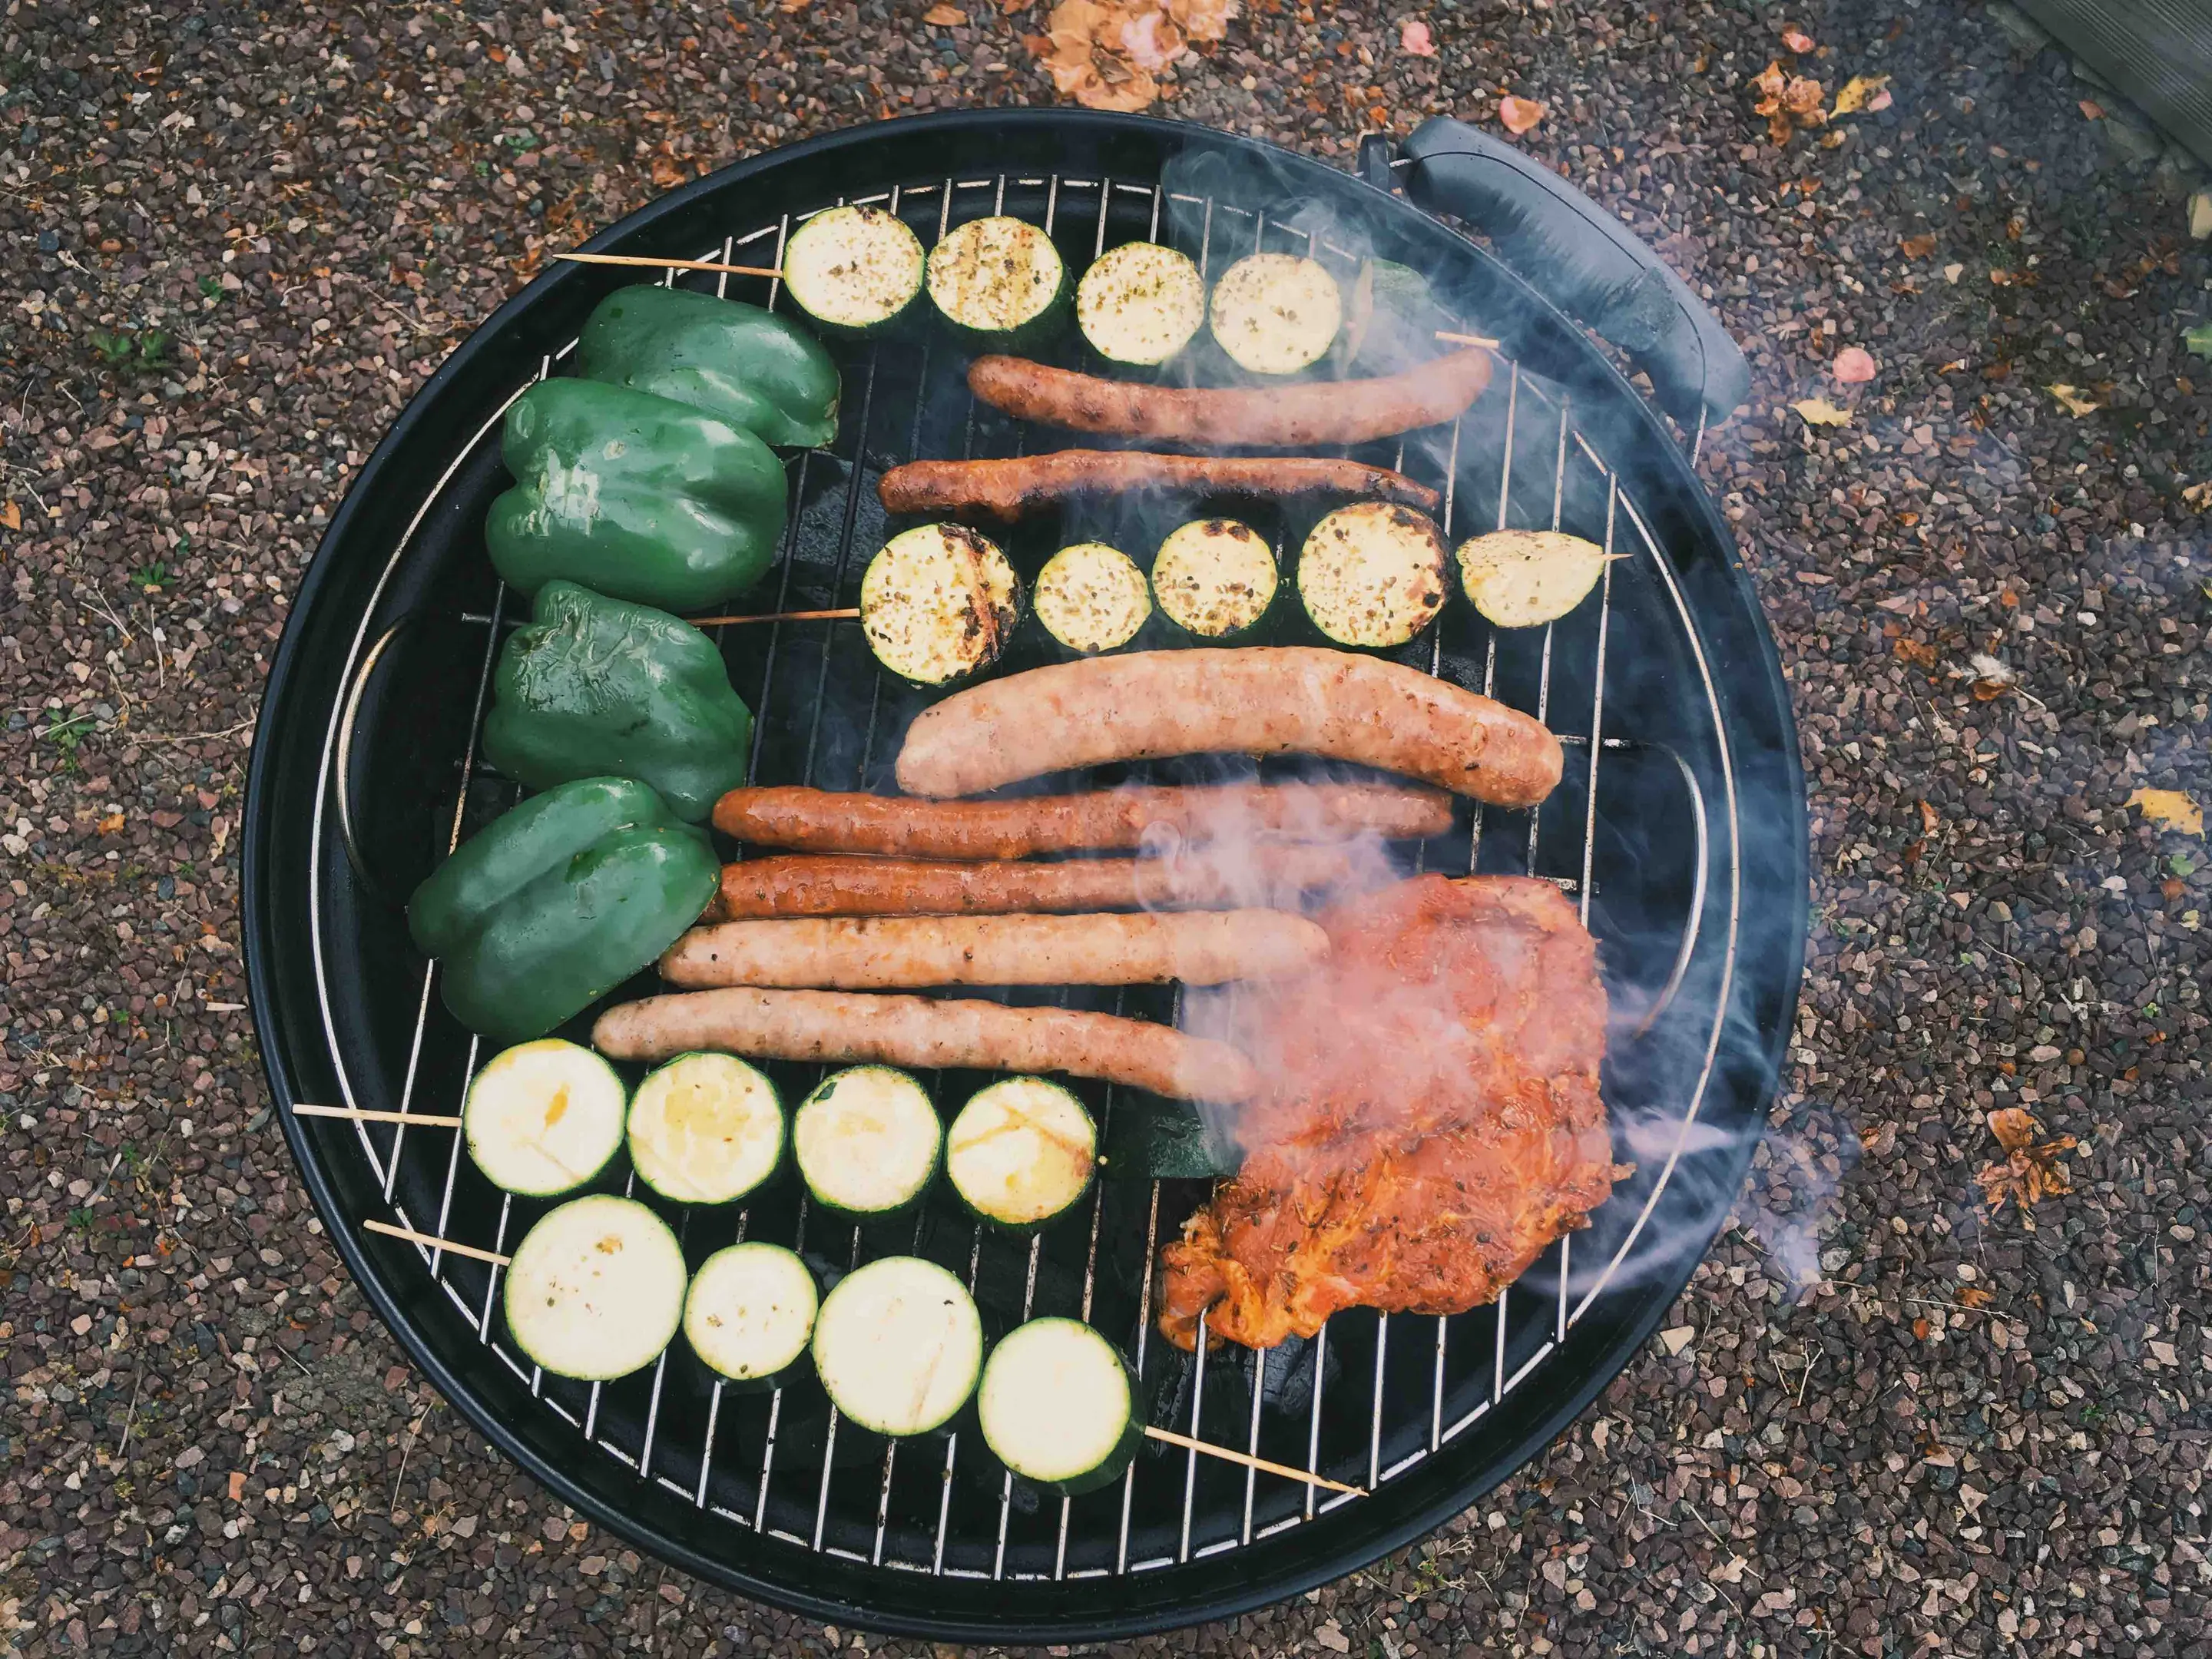 An overhead shot of sausages, zucchini, bell peppers, and chicken on a round grill.